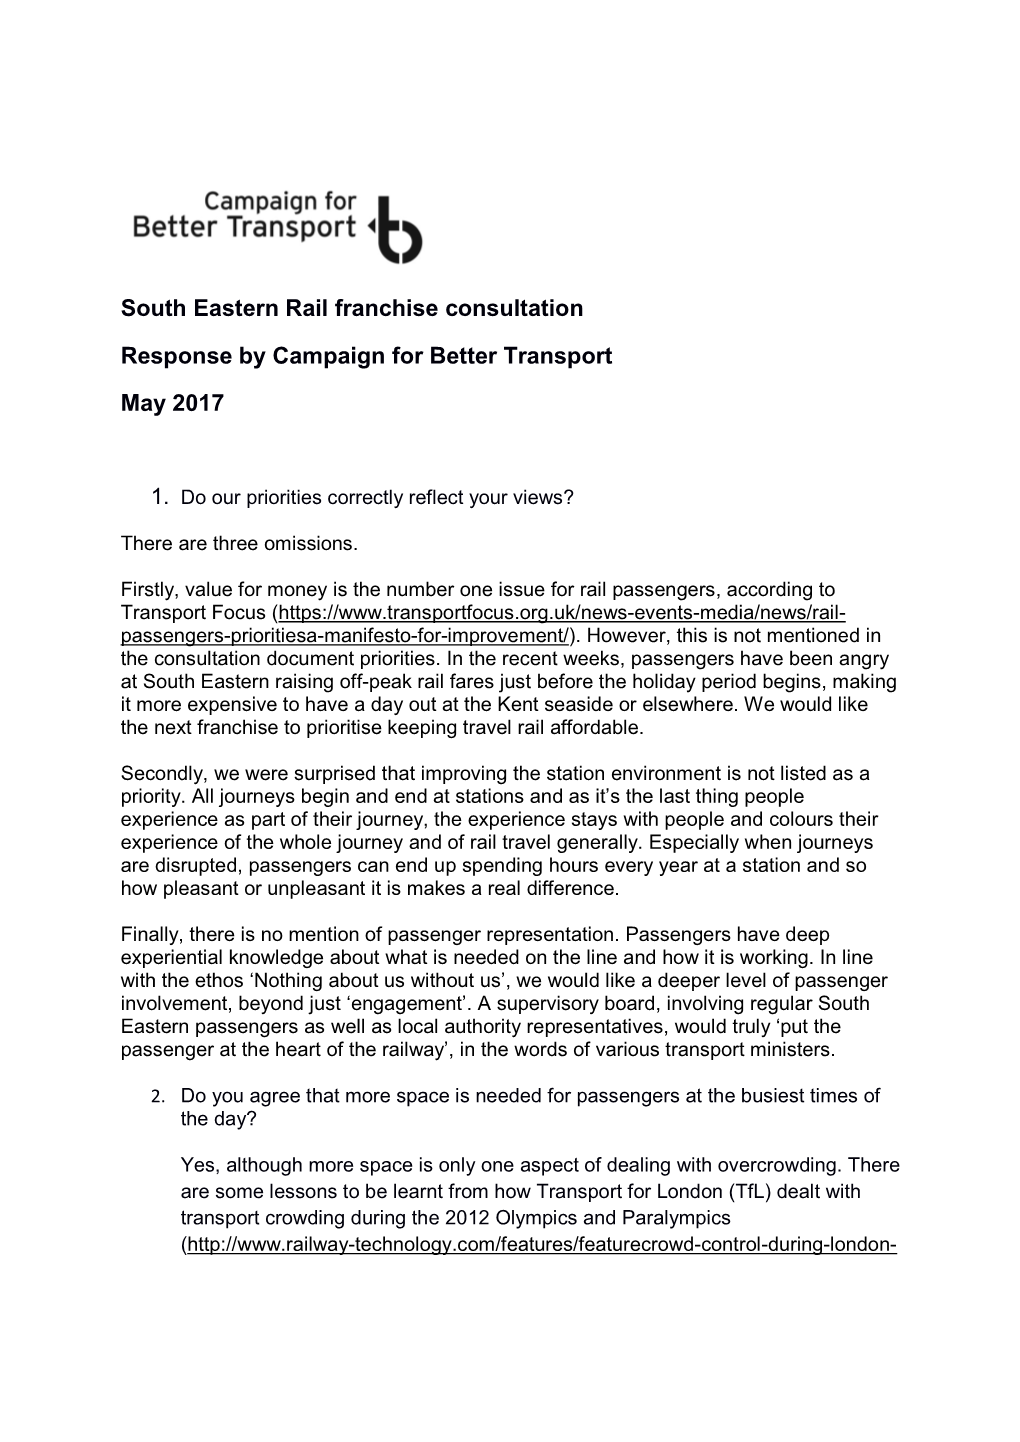 South Eastern Rail Franchise Consultation Response By